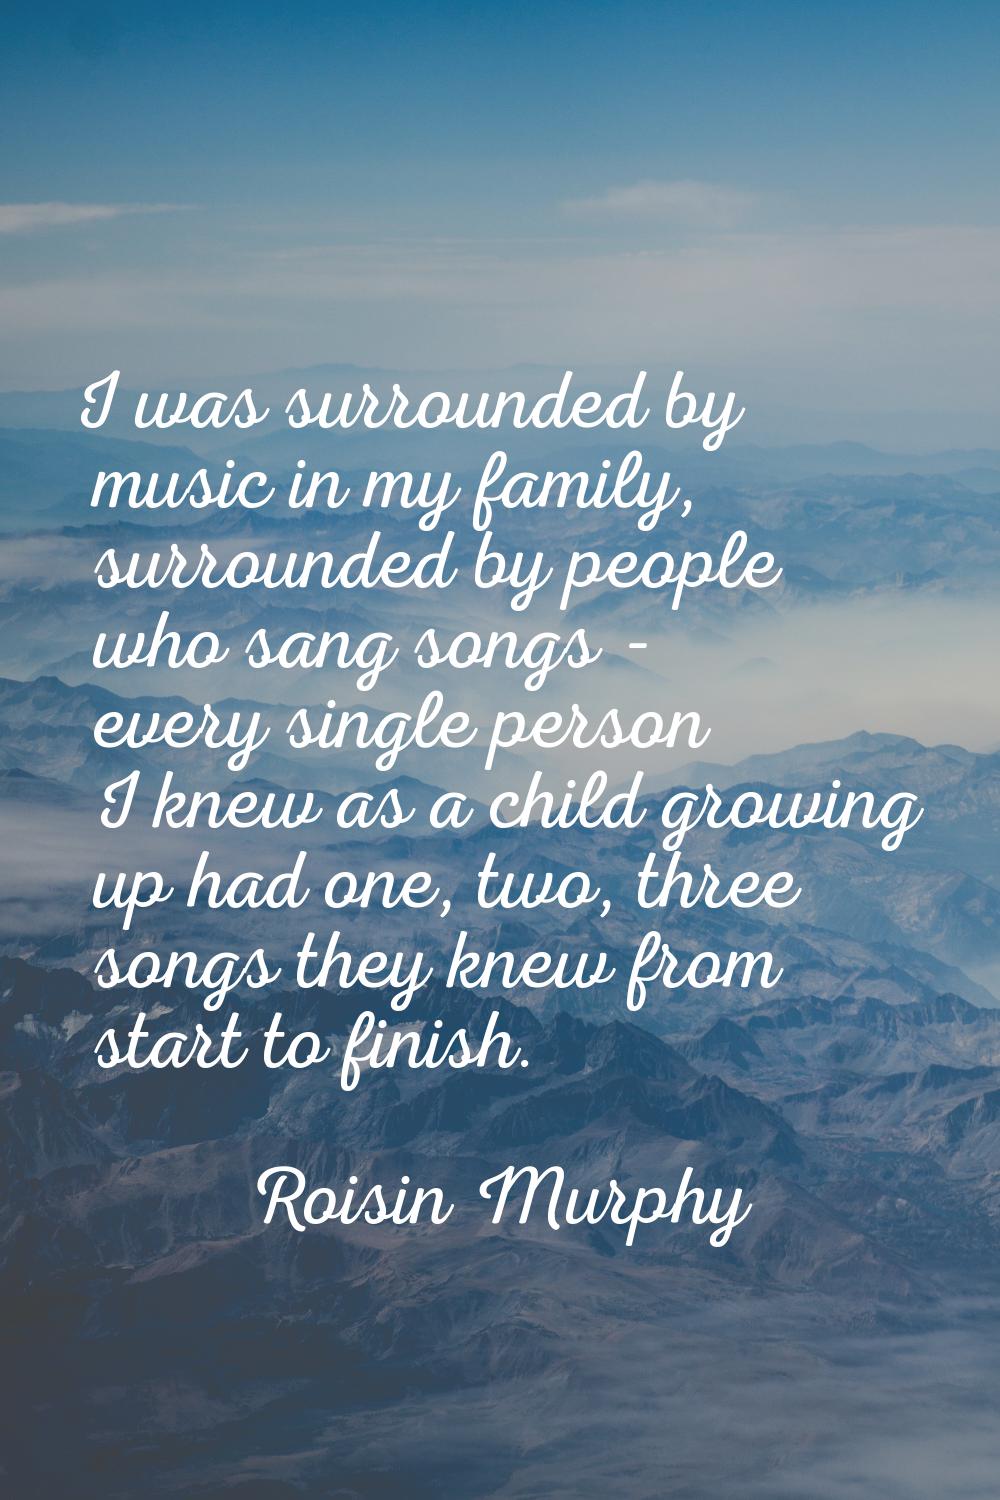 I was surrounded by music in my family, surrounded by people who sang songs - every single person I